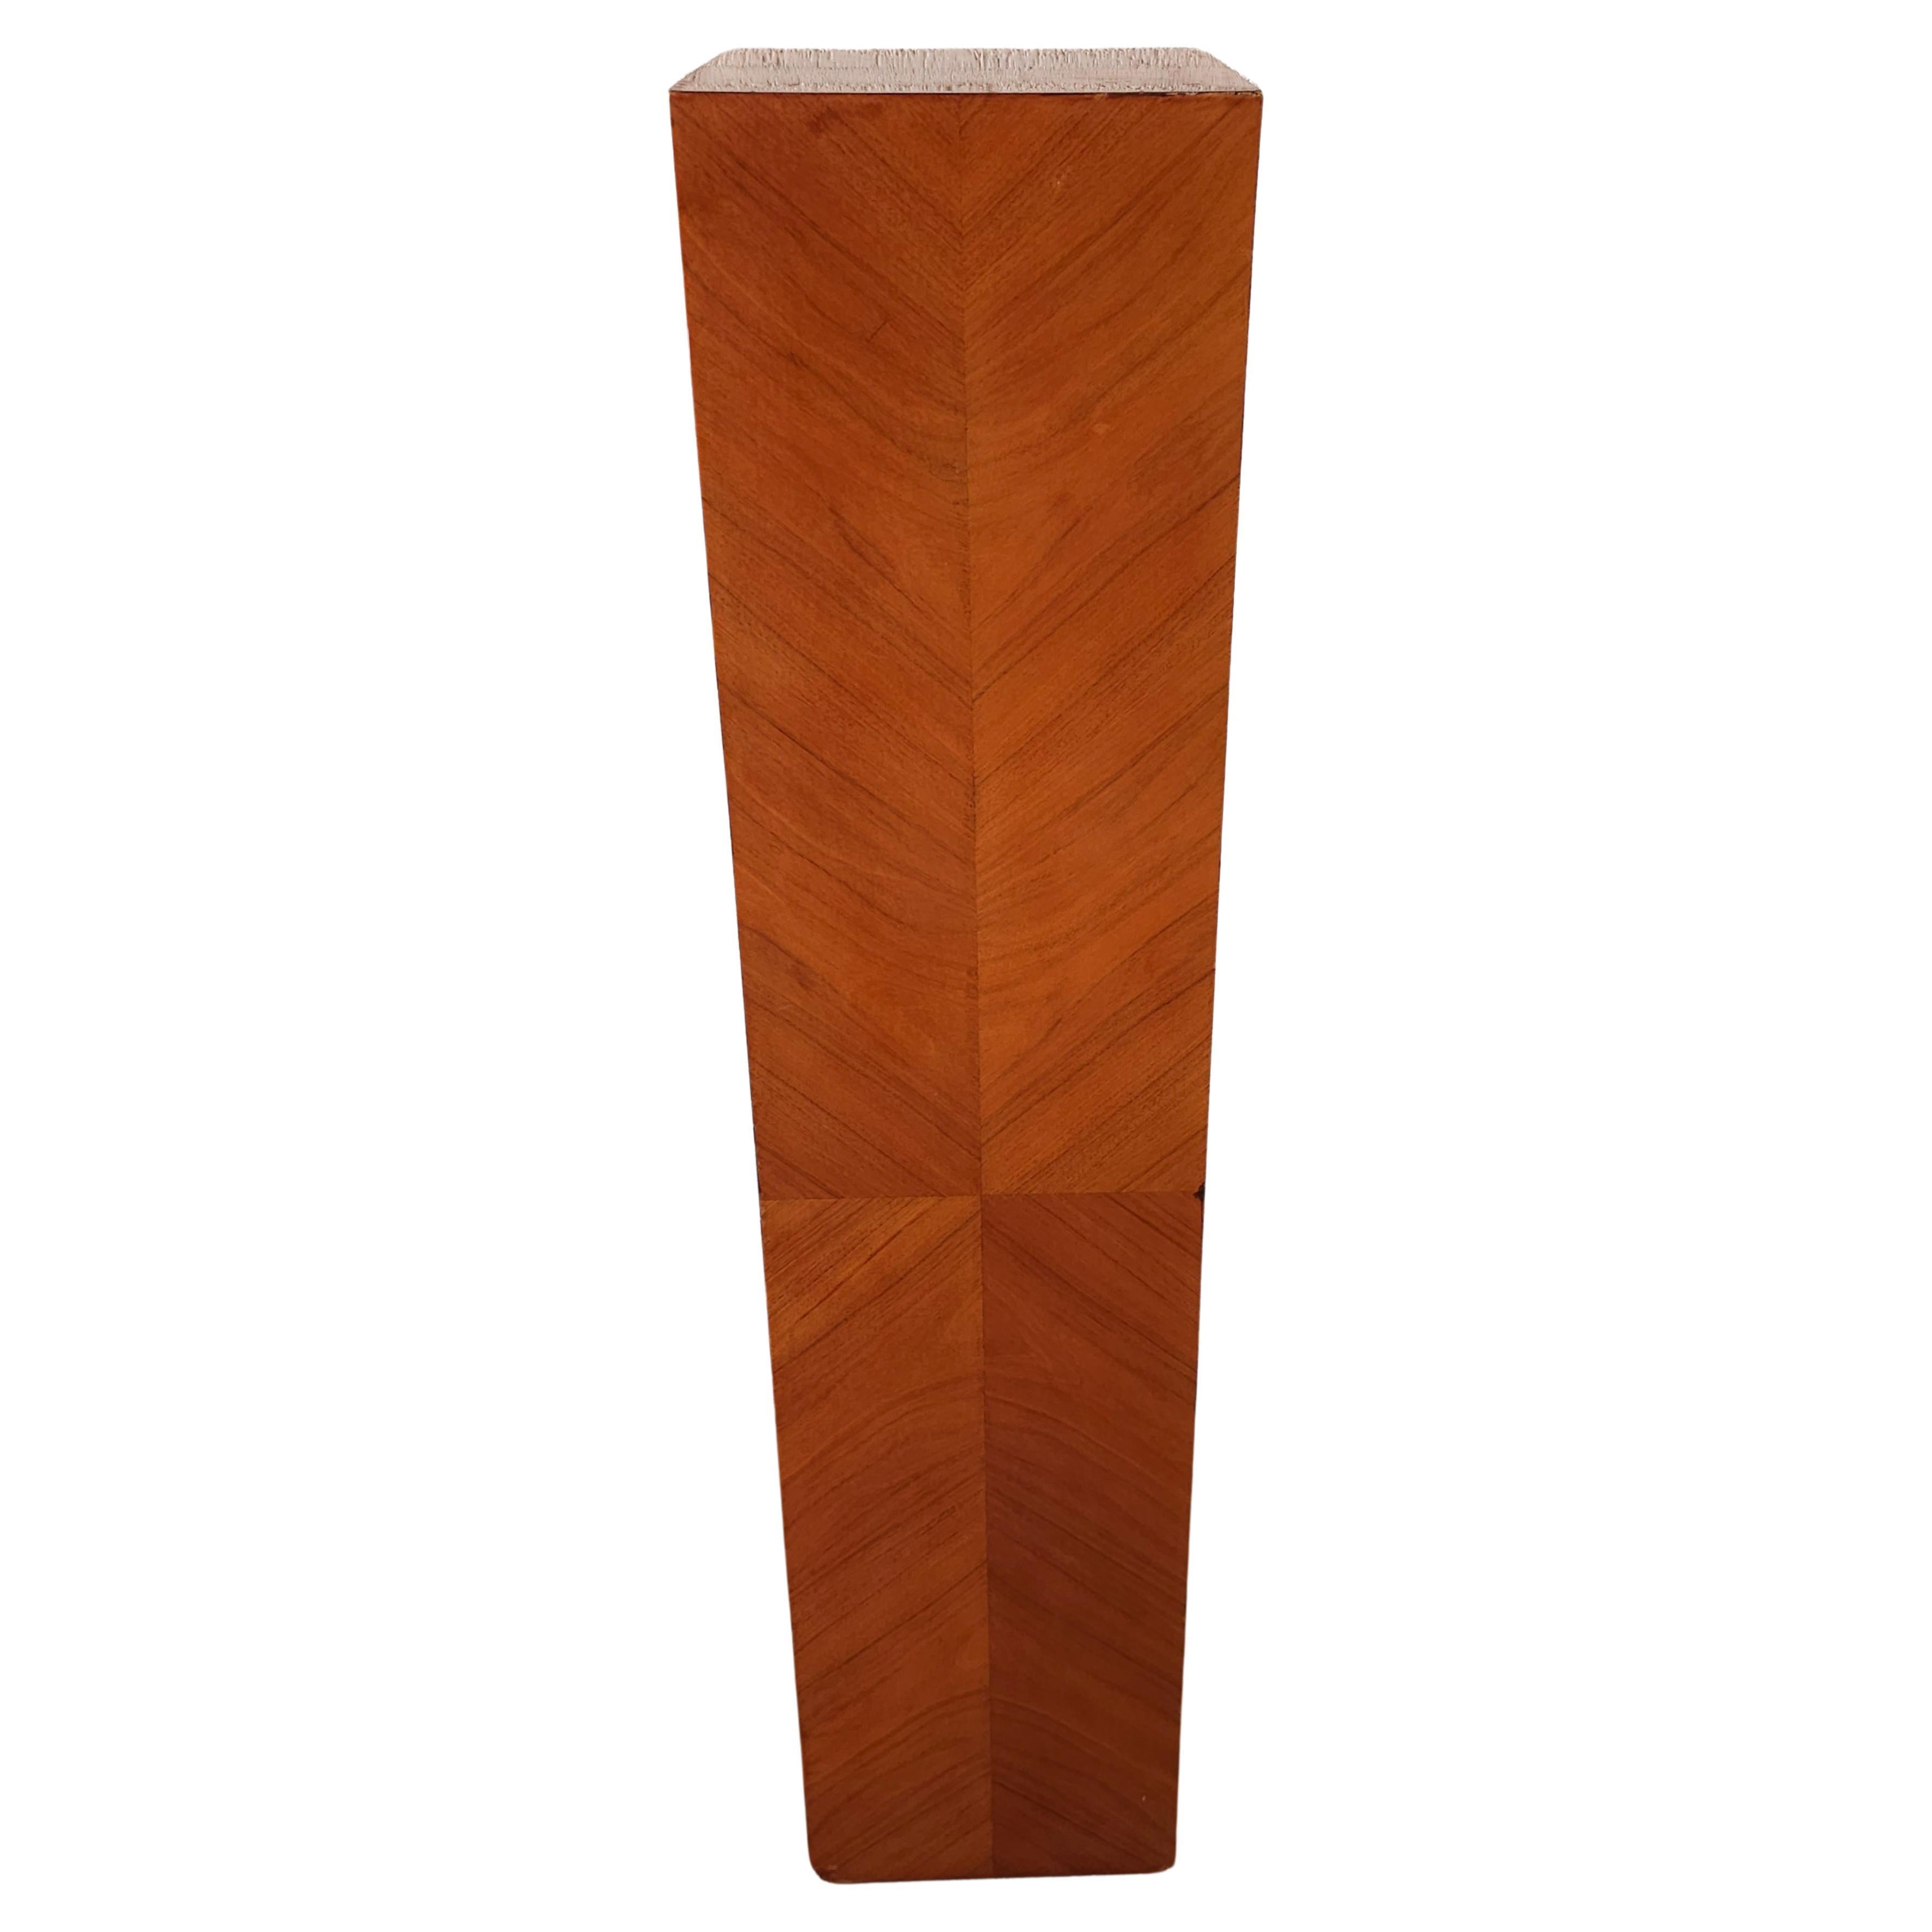 Mid 20th Century Square Bookmatched Veneer Pedestal Plant Stand